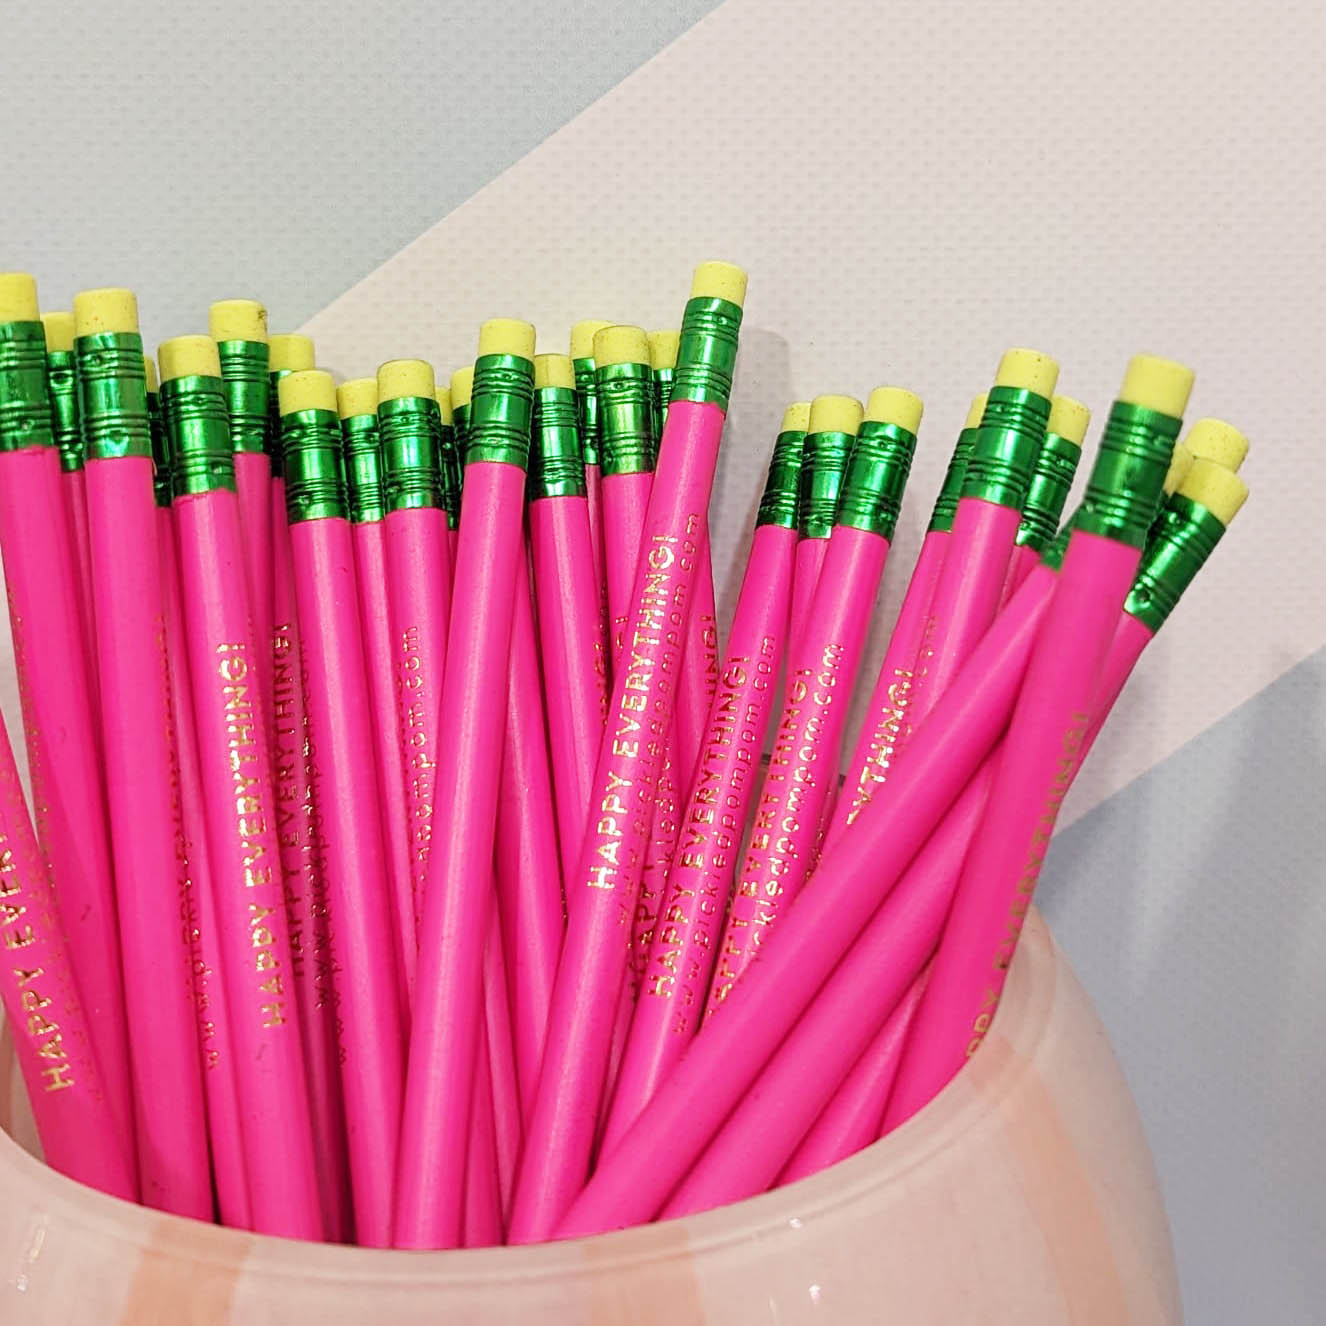 super extra gorgeous neon branded pencil!